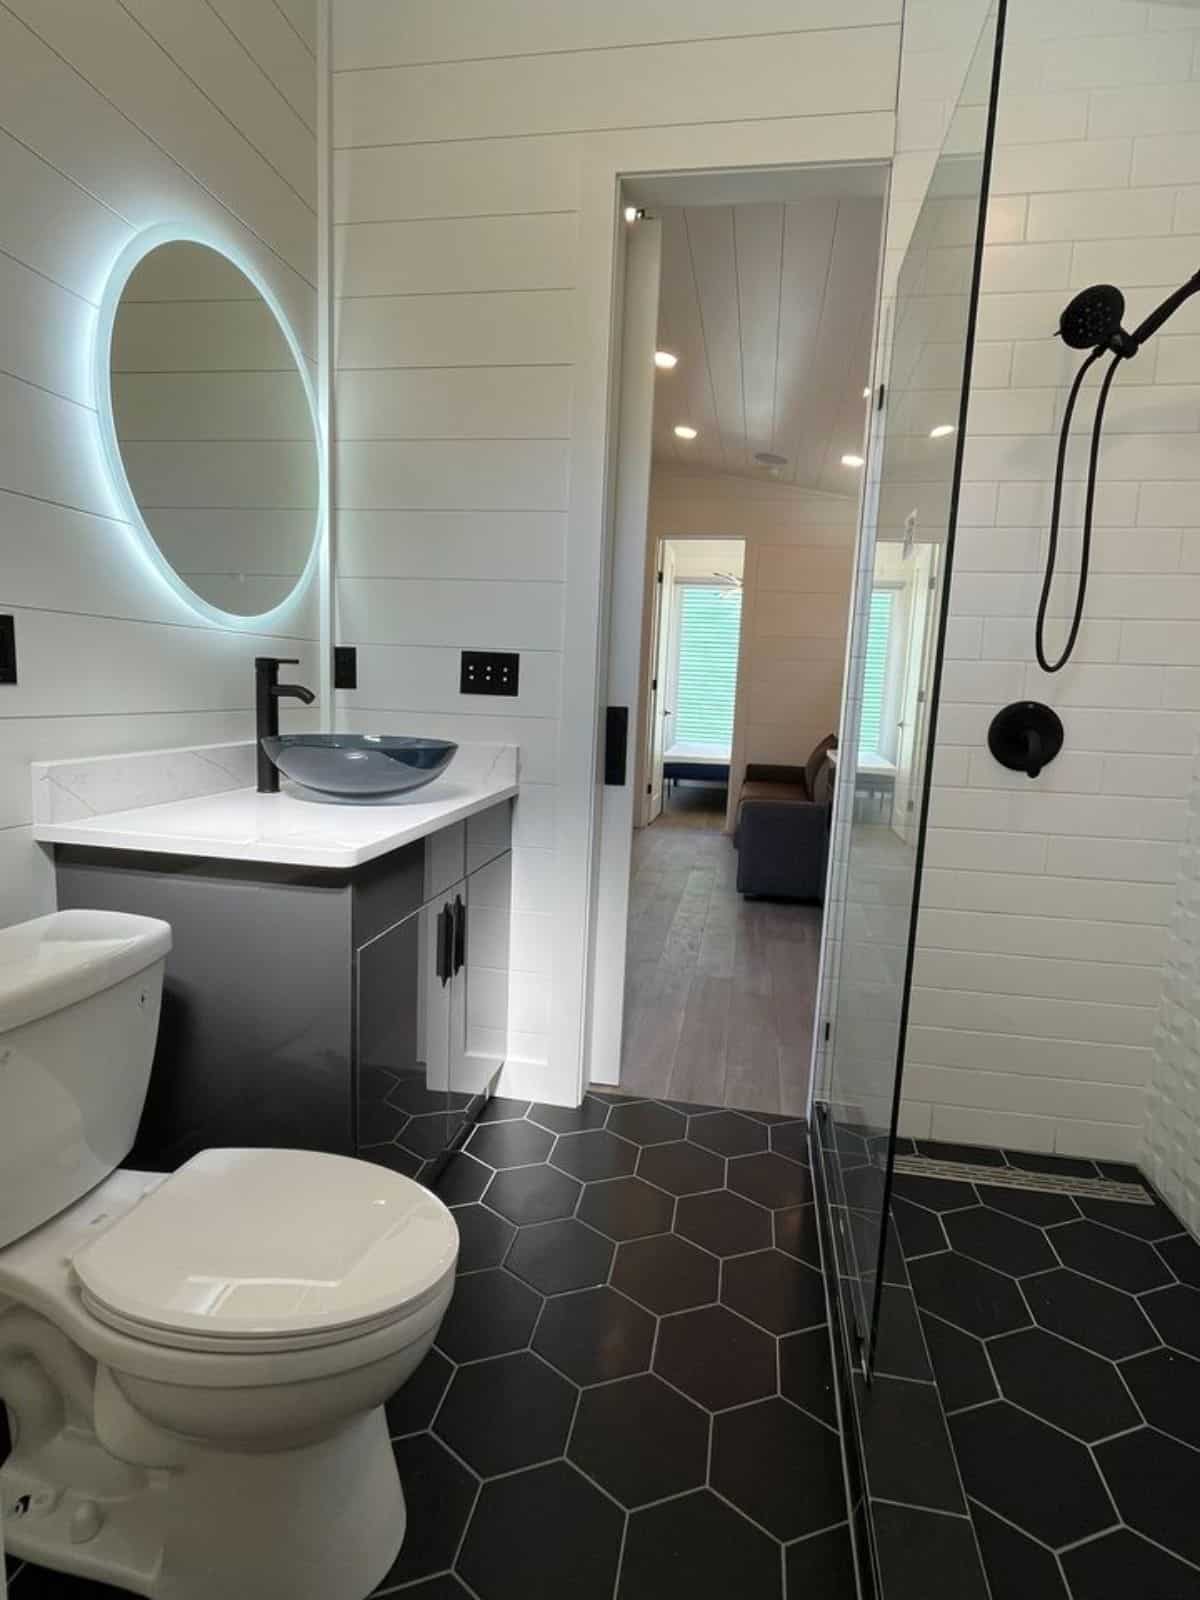 Bathroom is on another level with beautiful floor and walls with standard toilet and sink with vanity & shinning mirror